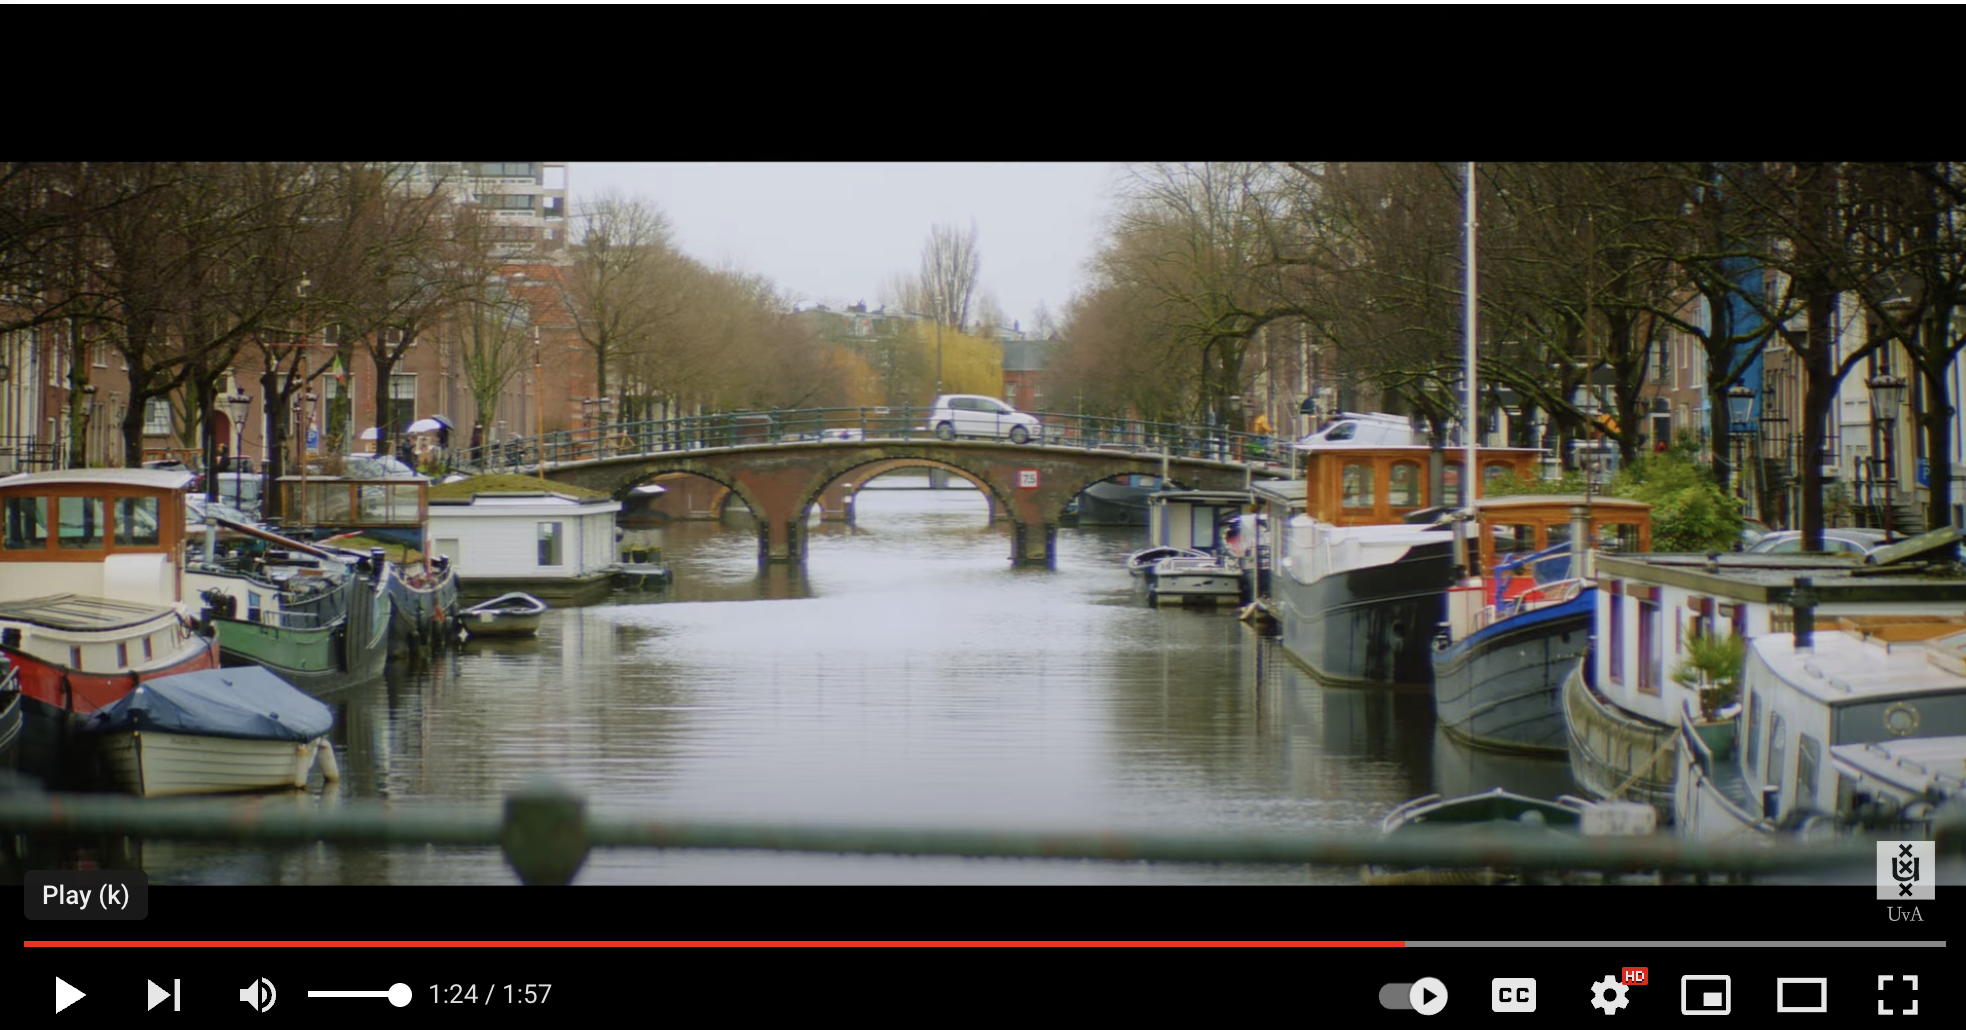 University of Amsterdam on YouTube - ideas for higher education